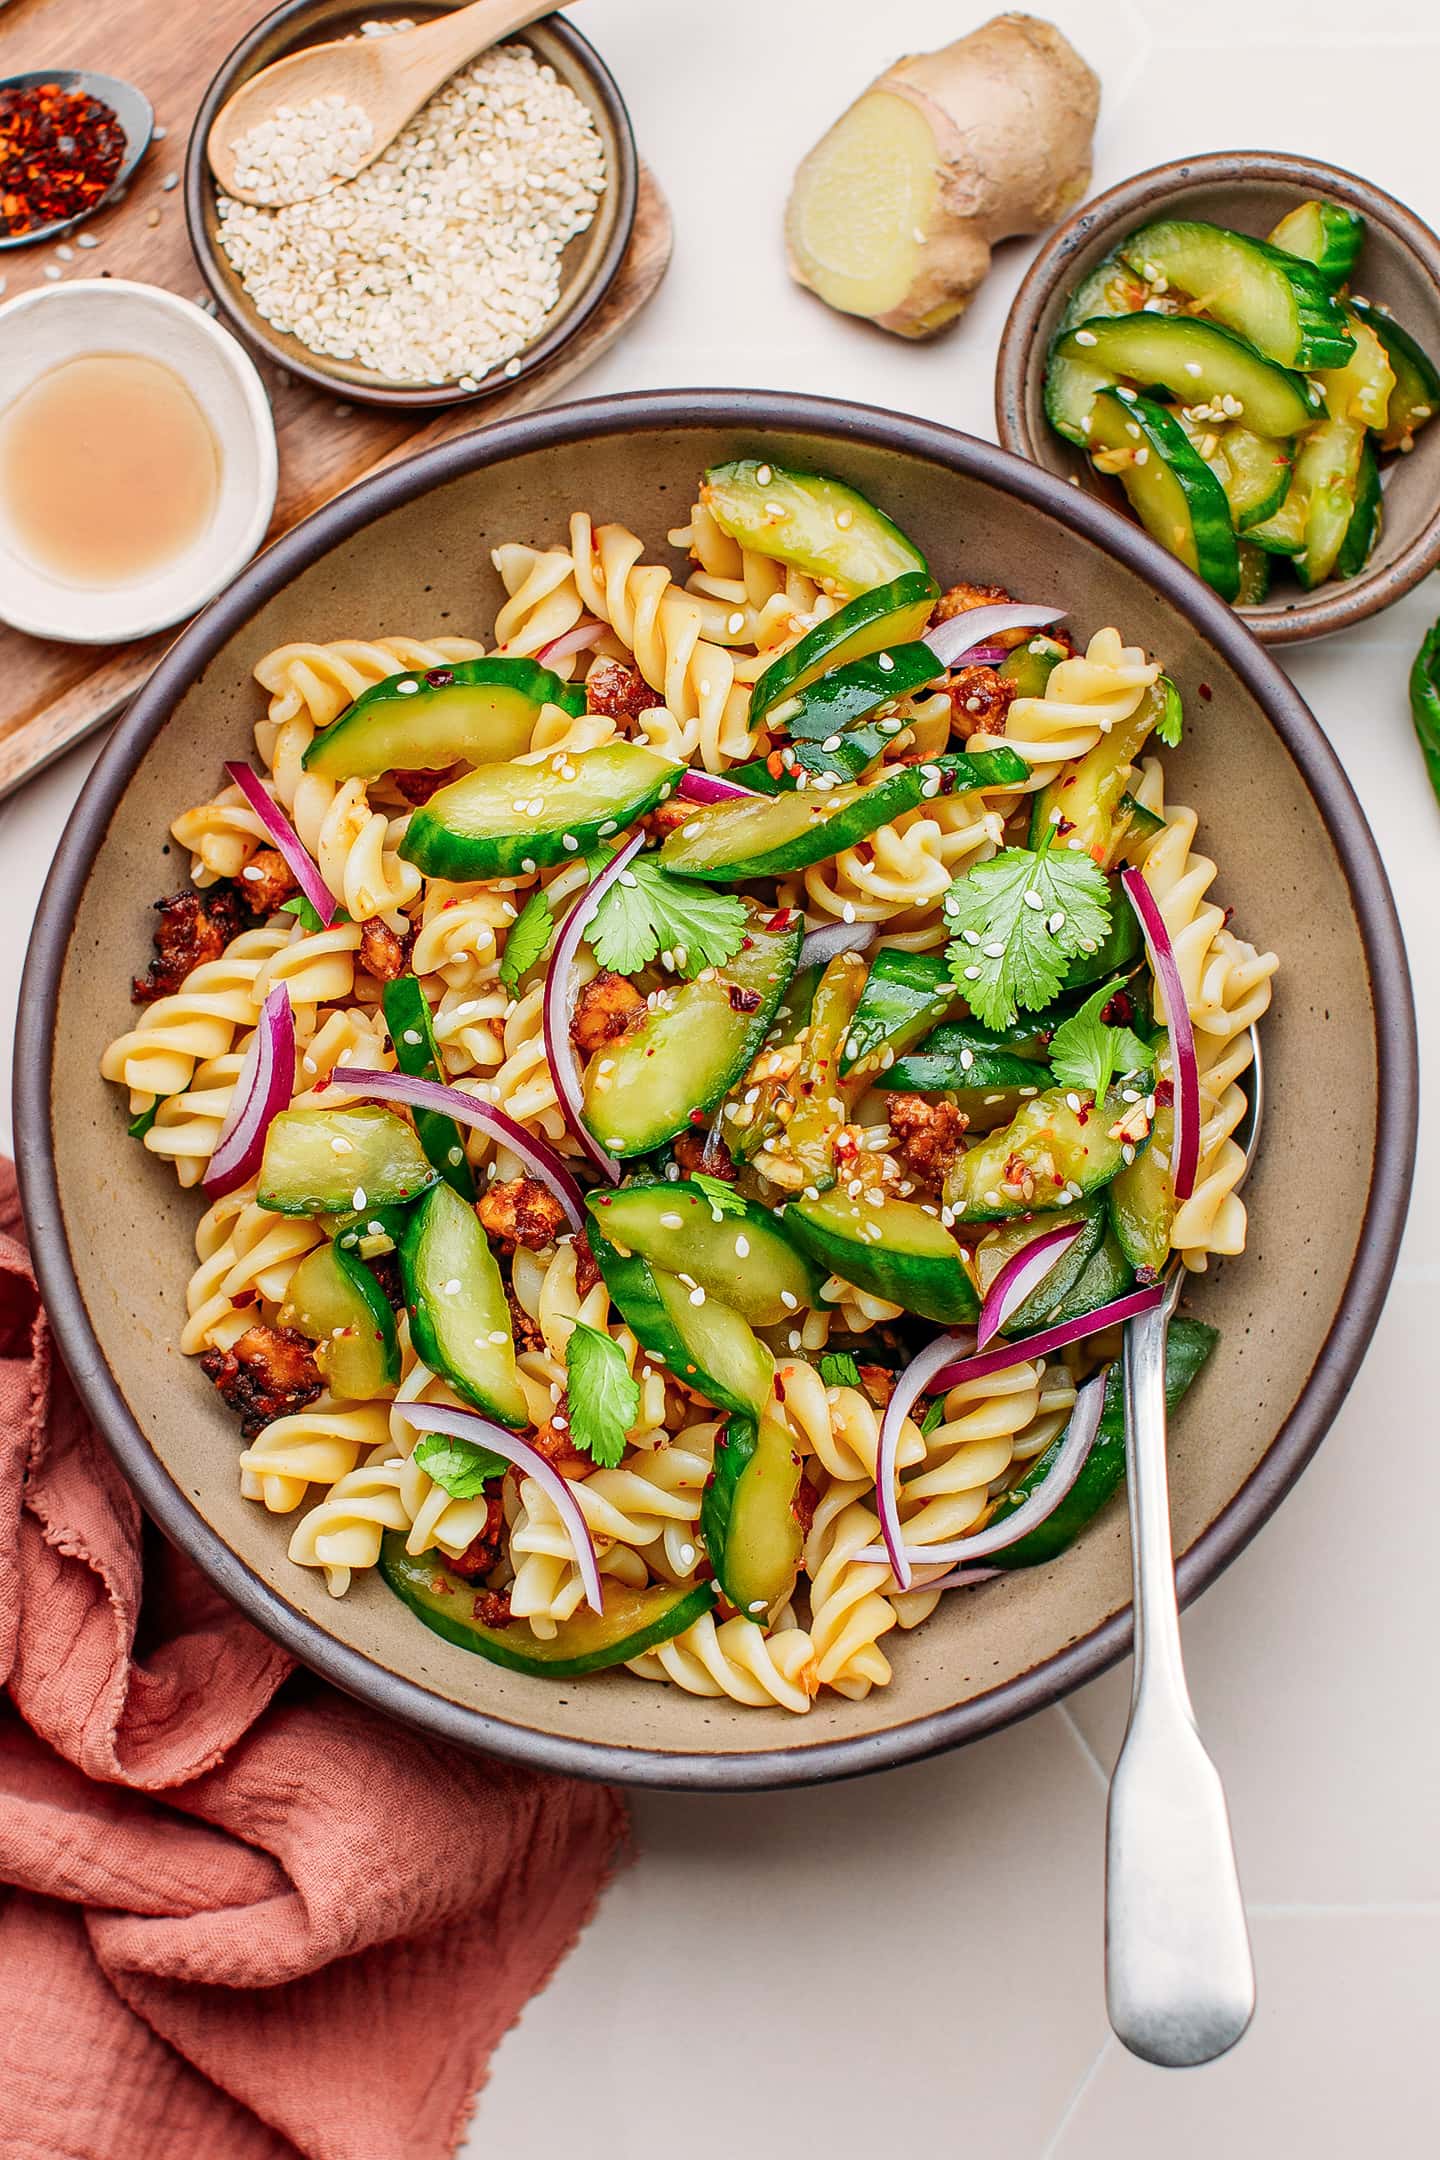 Smashed cucumbers, pasta, and red onions in a bowl.